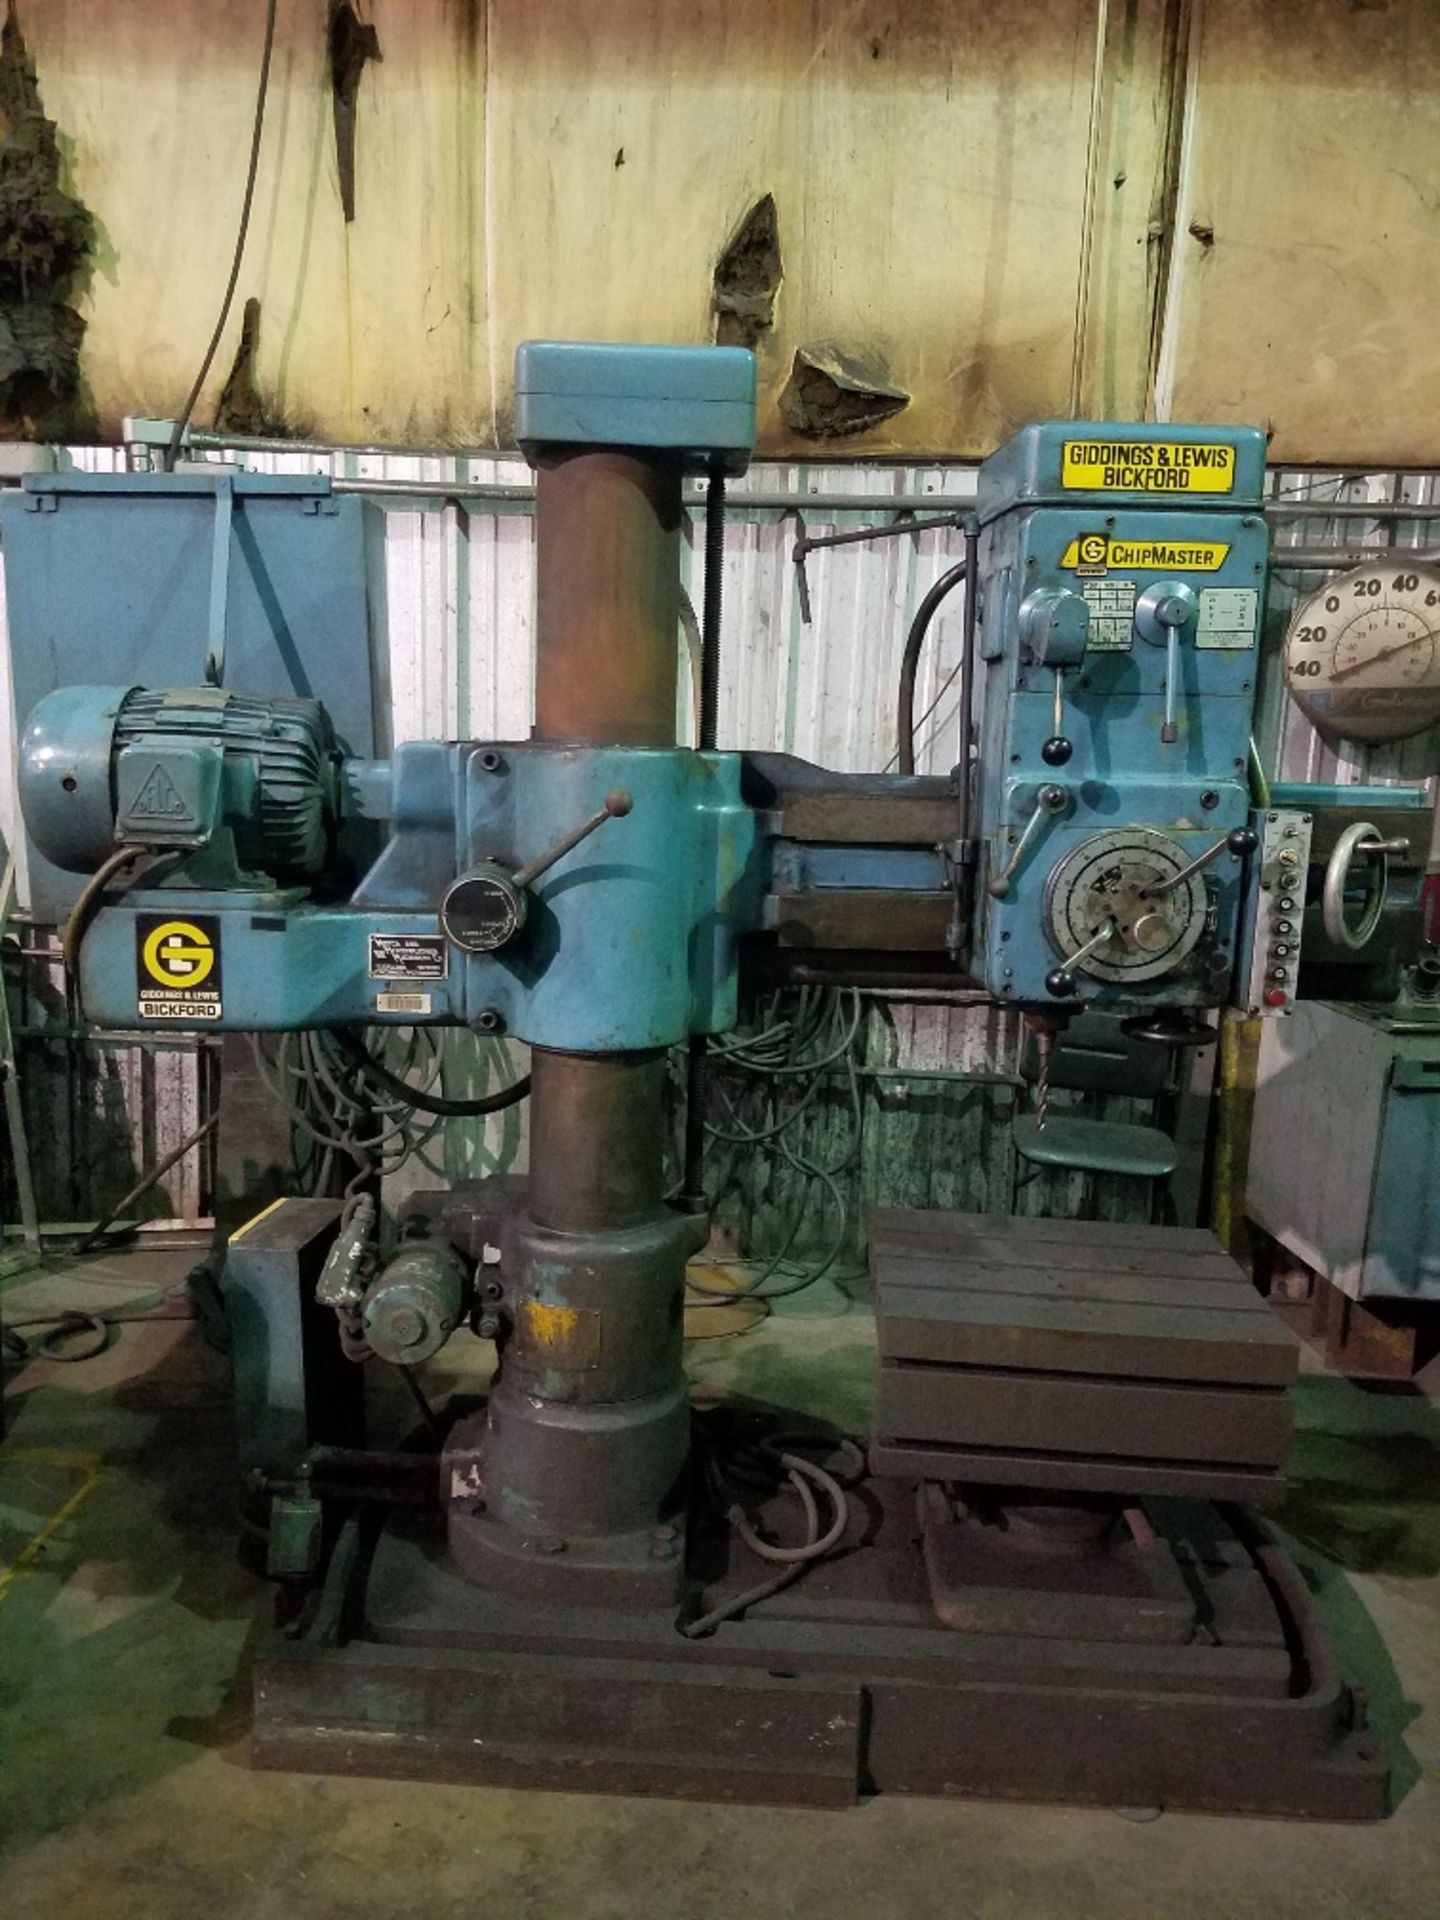 3’ x 9” GIDDINGS & LEWIS BICKFORD RADIAL ARM DRILL, Chipmaster, S/N 951-00565-74. (Location R: